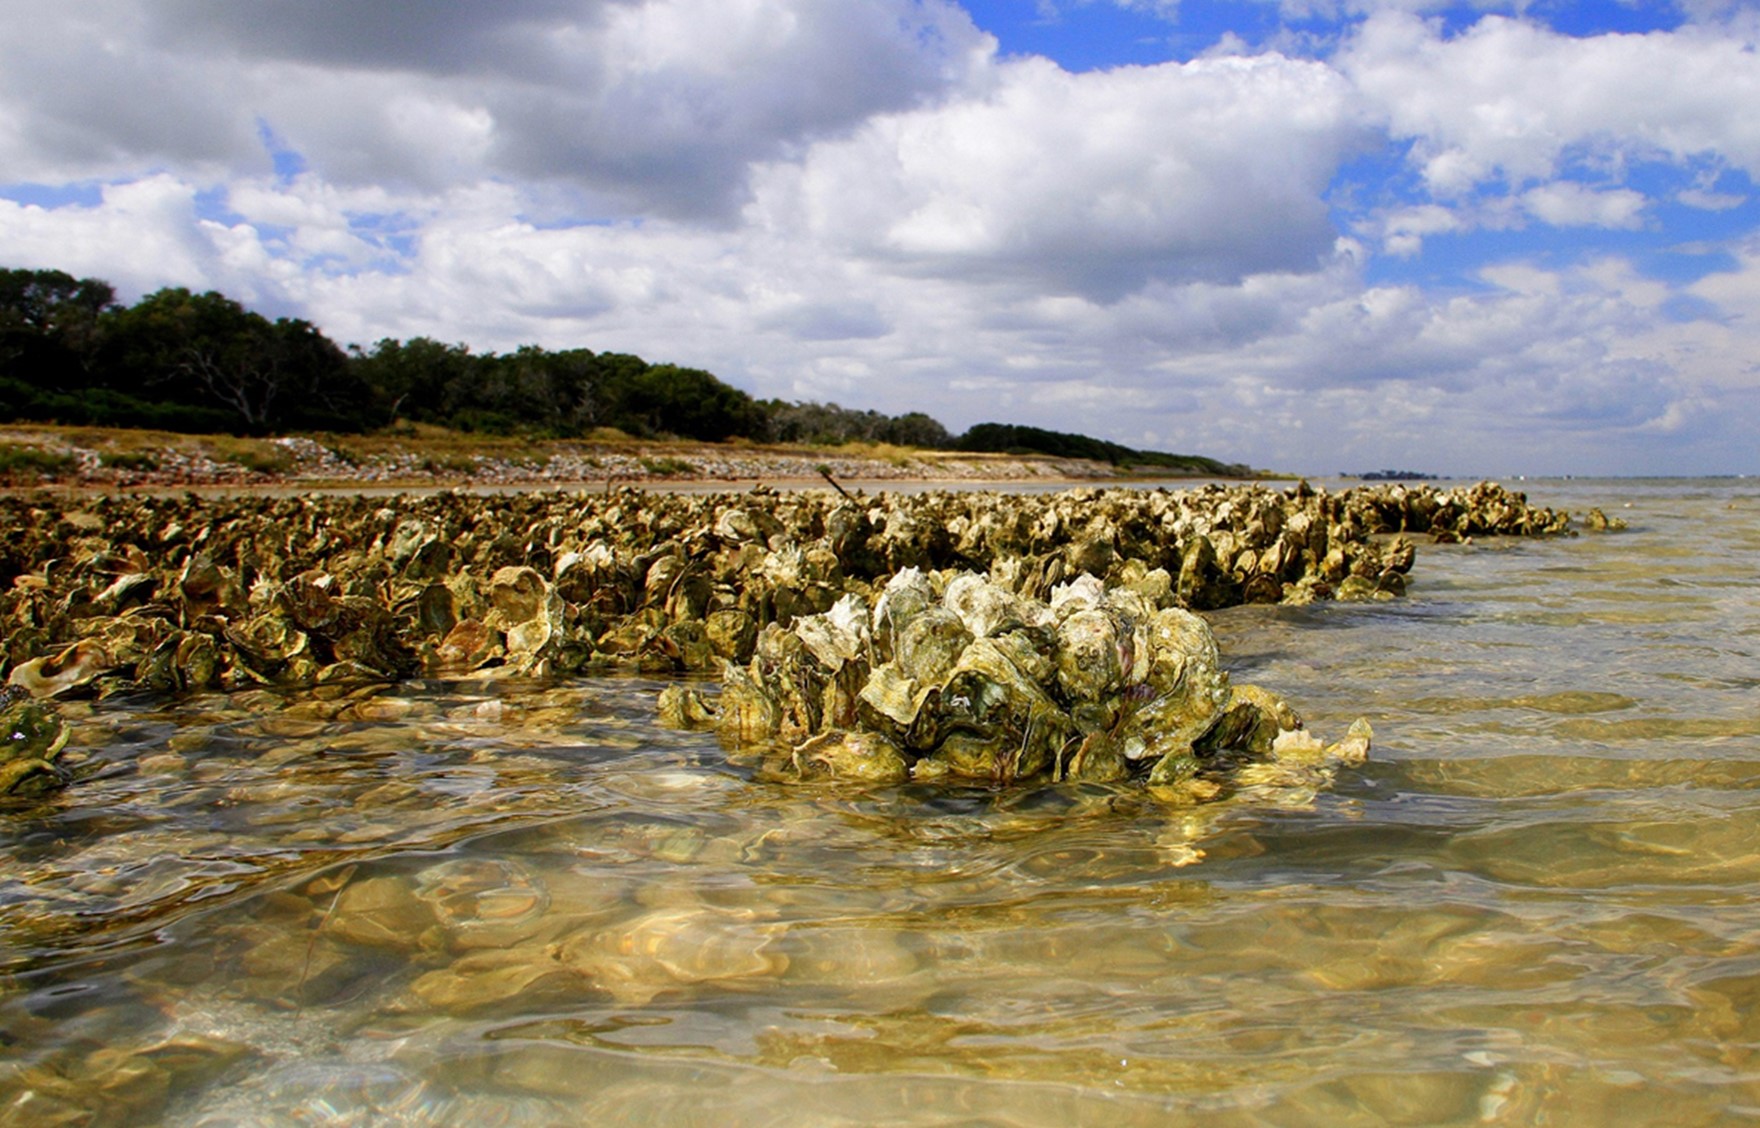 Moore Outdoors Podcast: Problems with Oyster Harvest Along the Coast with Shane Bonnot